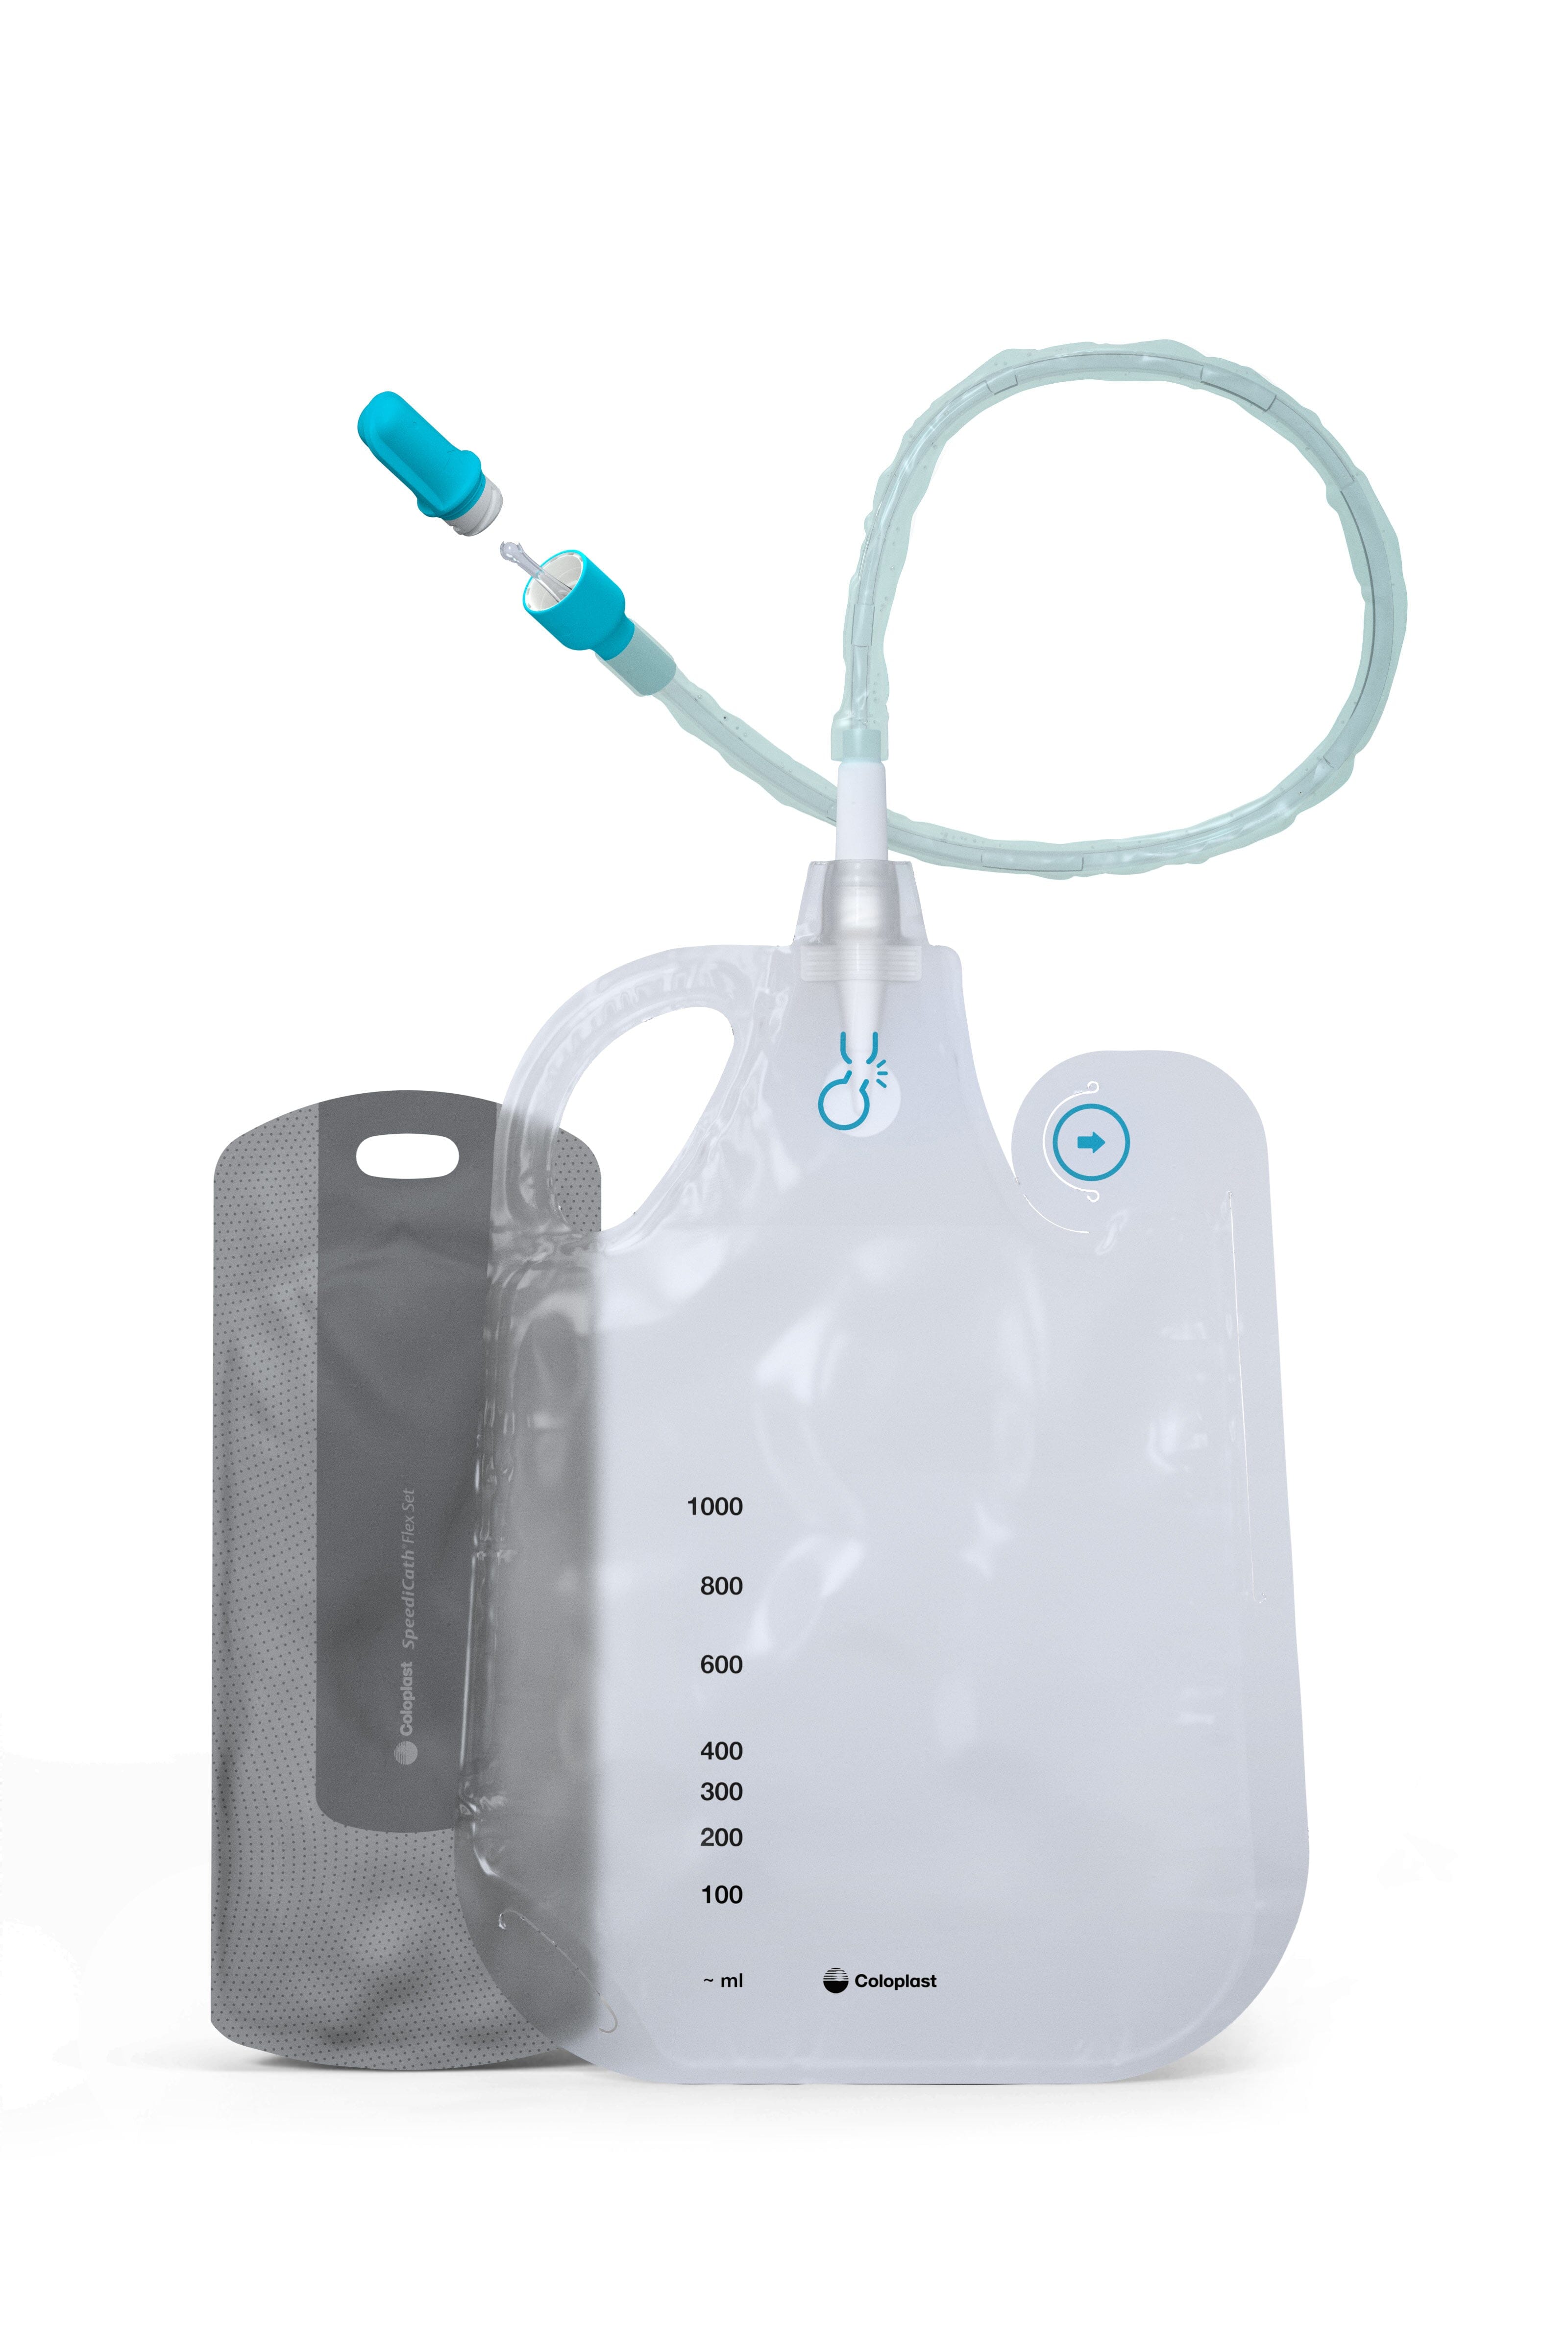 Medline Drainage Bag with Antireflux Tower at IndeMedical.com